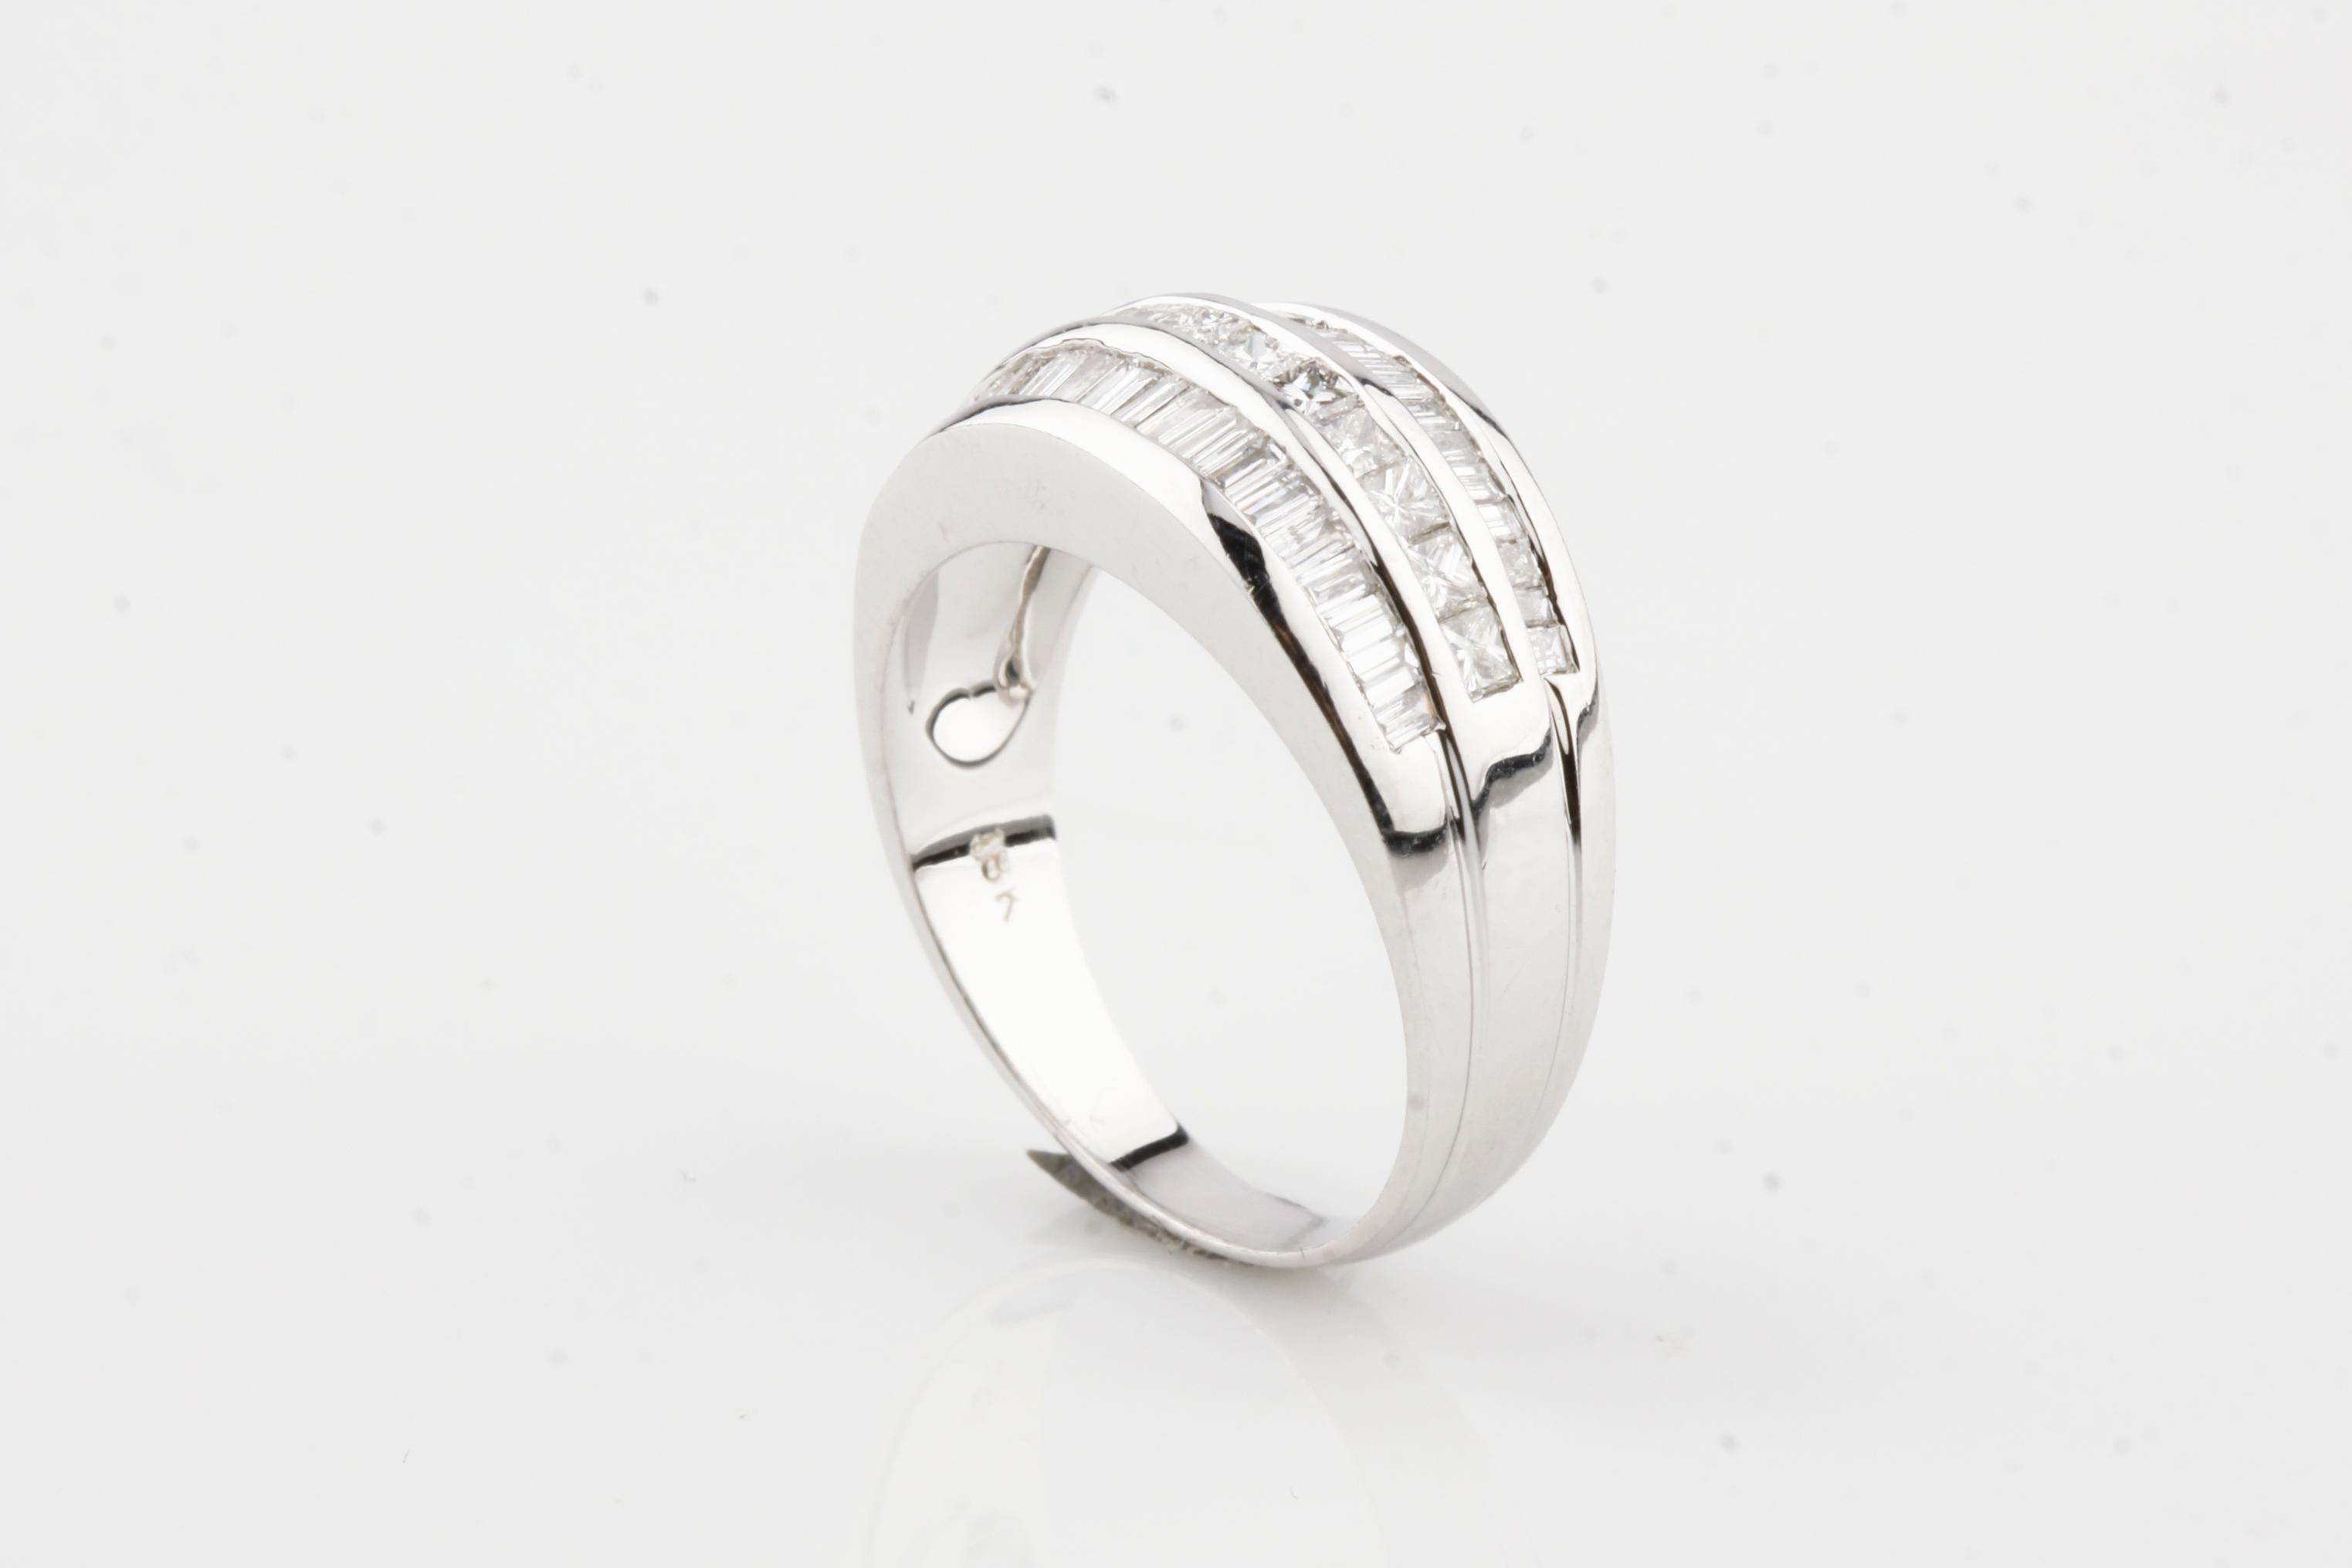 Gorgeous Band Ring
Features Three Rows of Channel Set Stones
Princess Cut Row in Middle Flanked by Two Rows of Baguettes
Total Diamond Weight = 1.36 ct
Size 6.75
Width of Front = 9 mm
Width of Band at Back = 3 mm
Total Mass = 5.7 hrams
Gorgeous Gift!